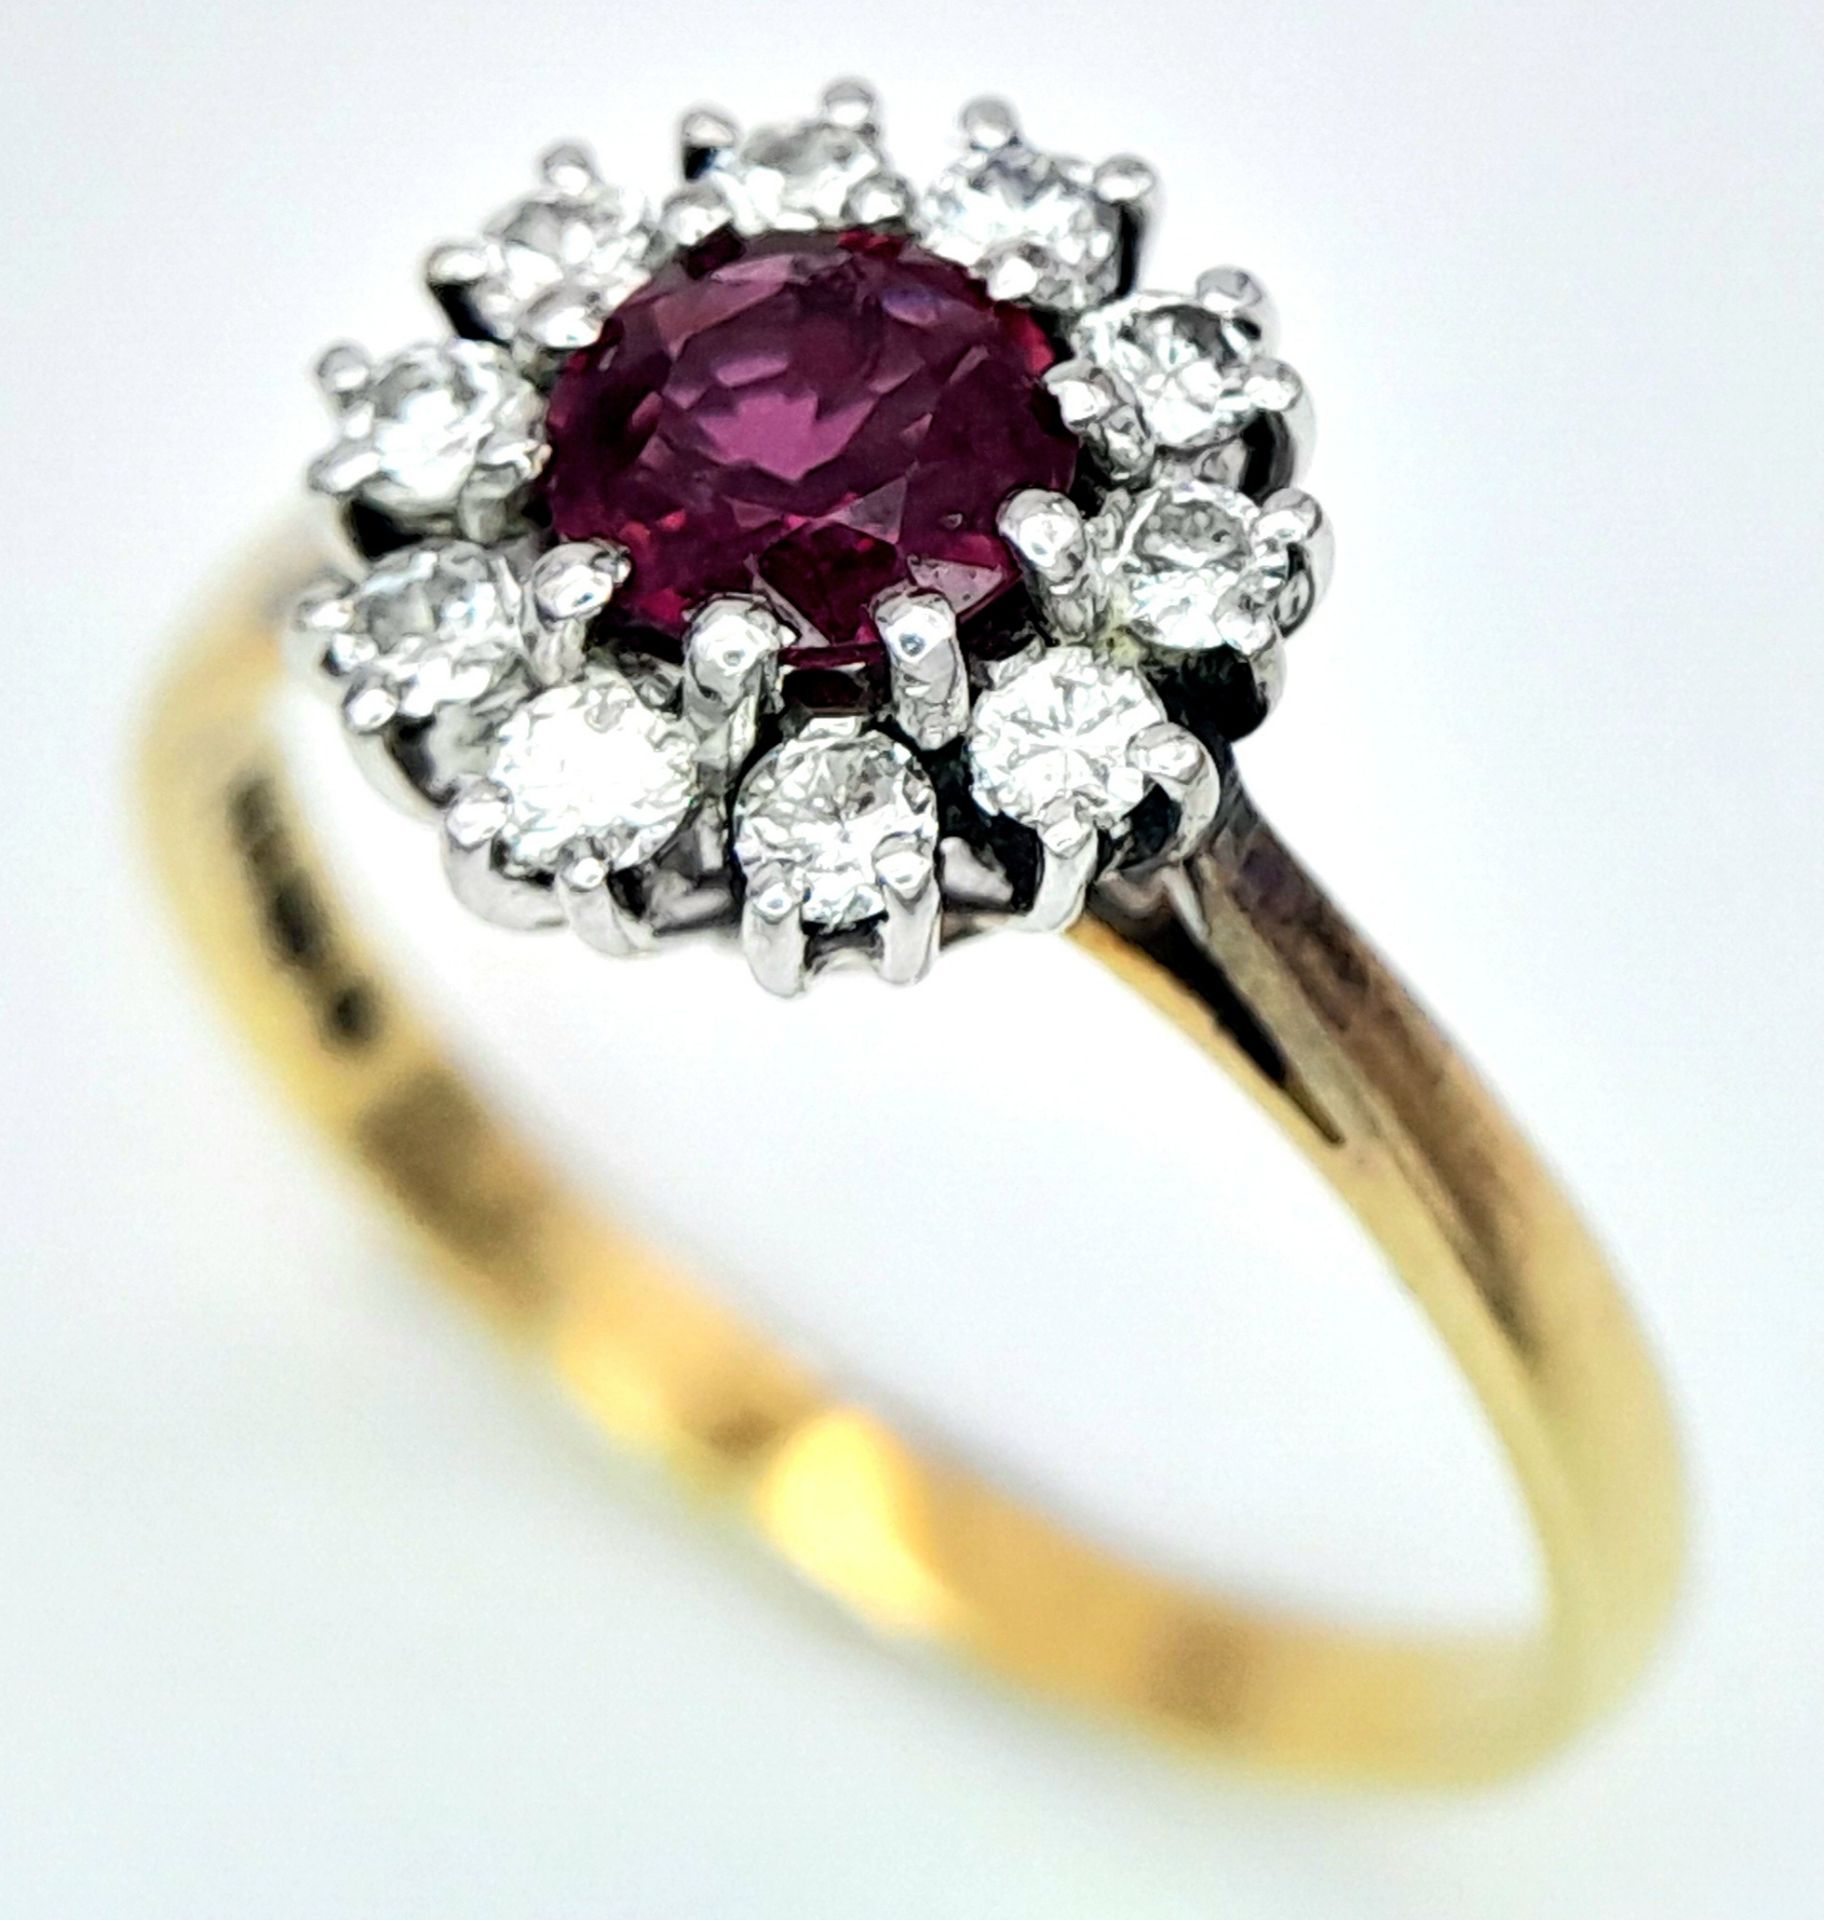 An 18K Yellow Gold, Ruby and Diamond Ring. Round cut ruby with a diamond halo. Size M 1/2. 2.8g